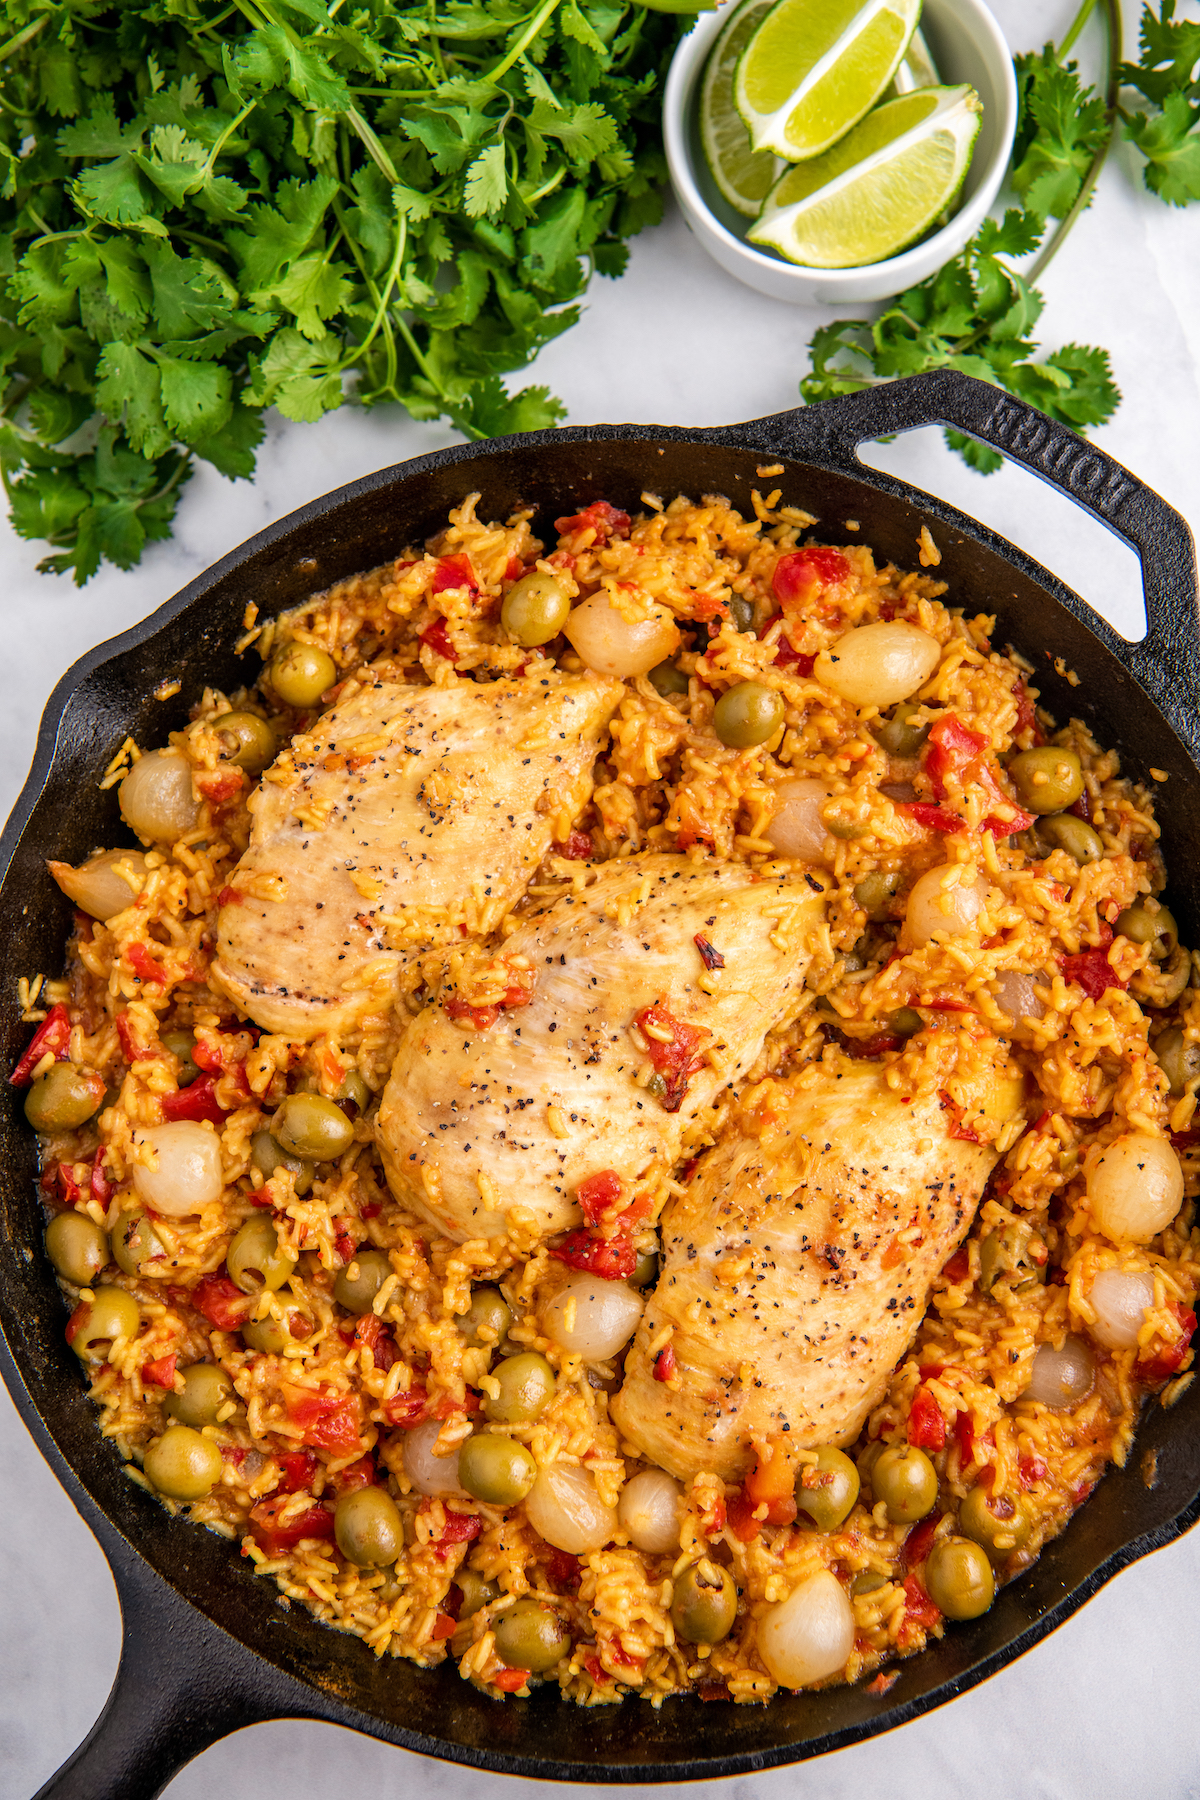 Cast iron skillet with Spanish rice and chicken. the rice has olives and onions in it and parsley on the side